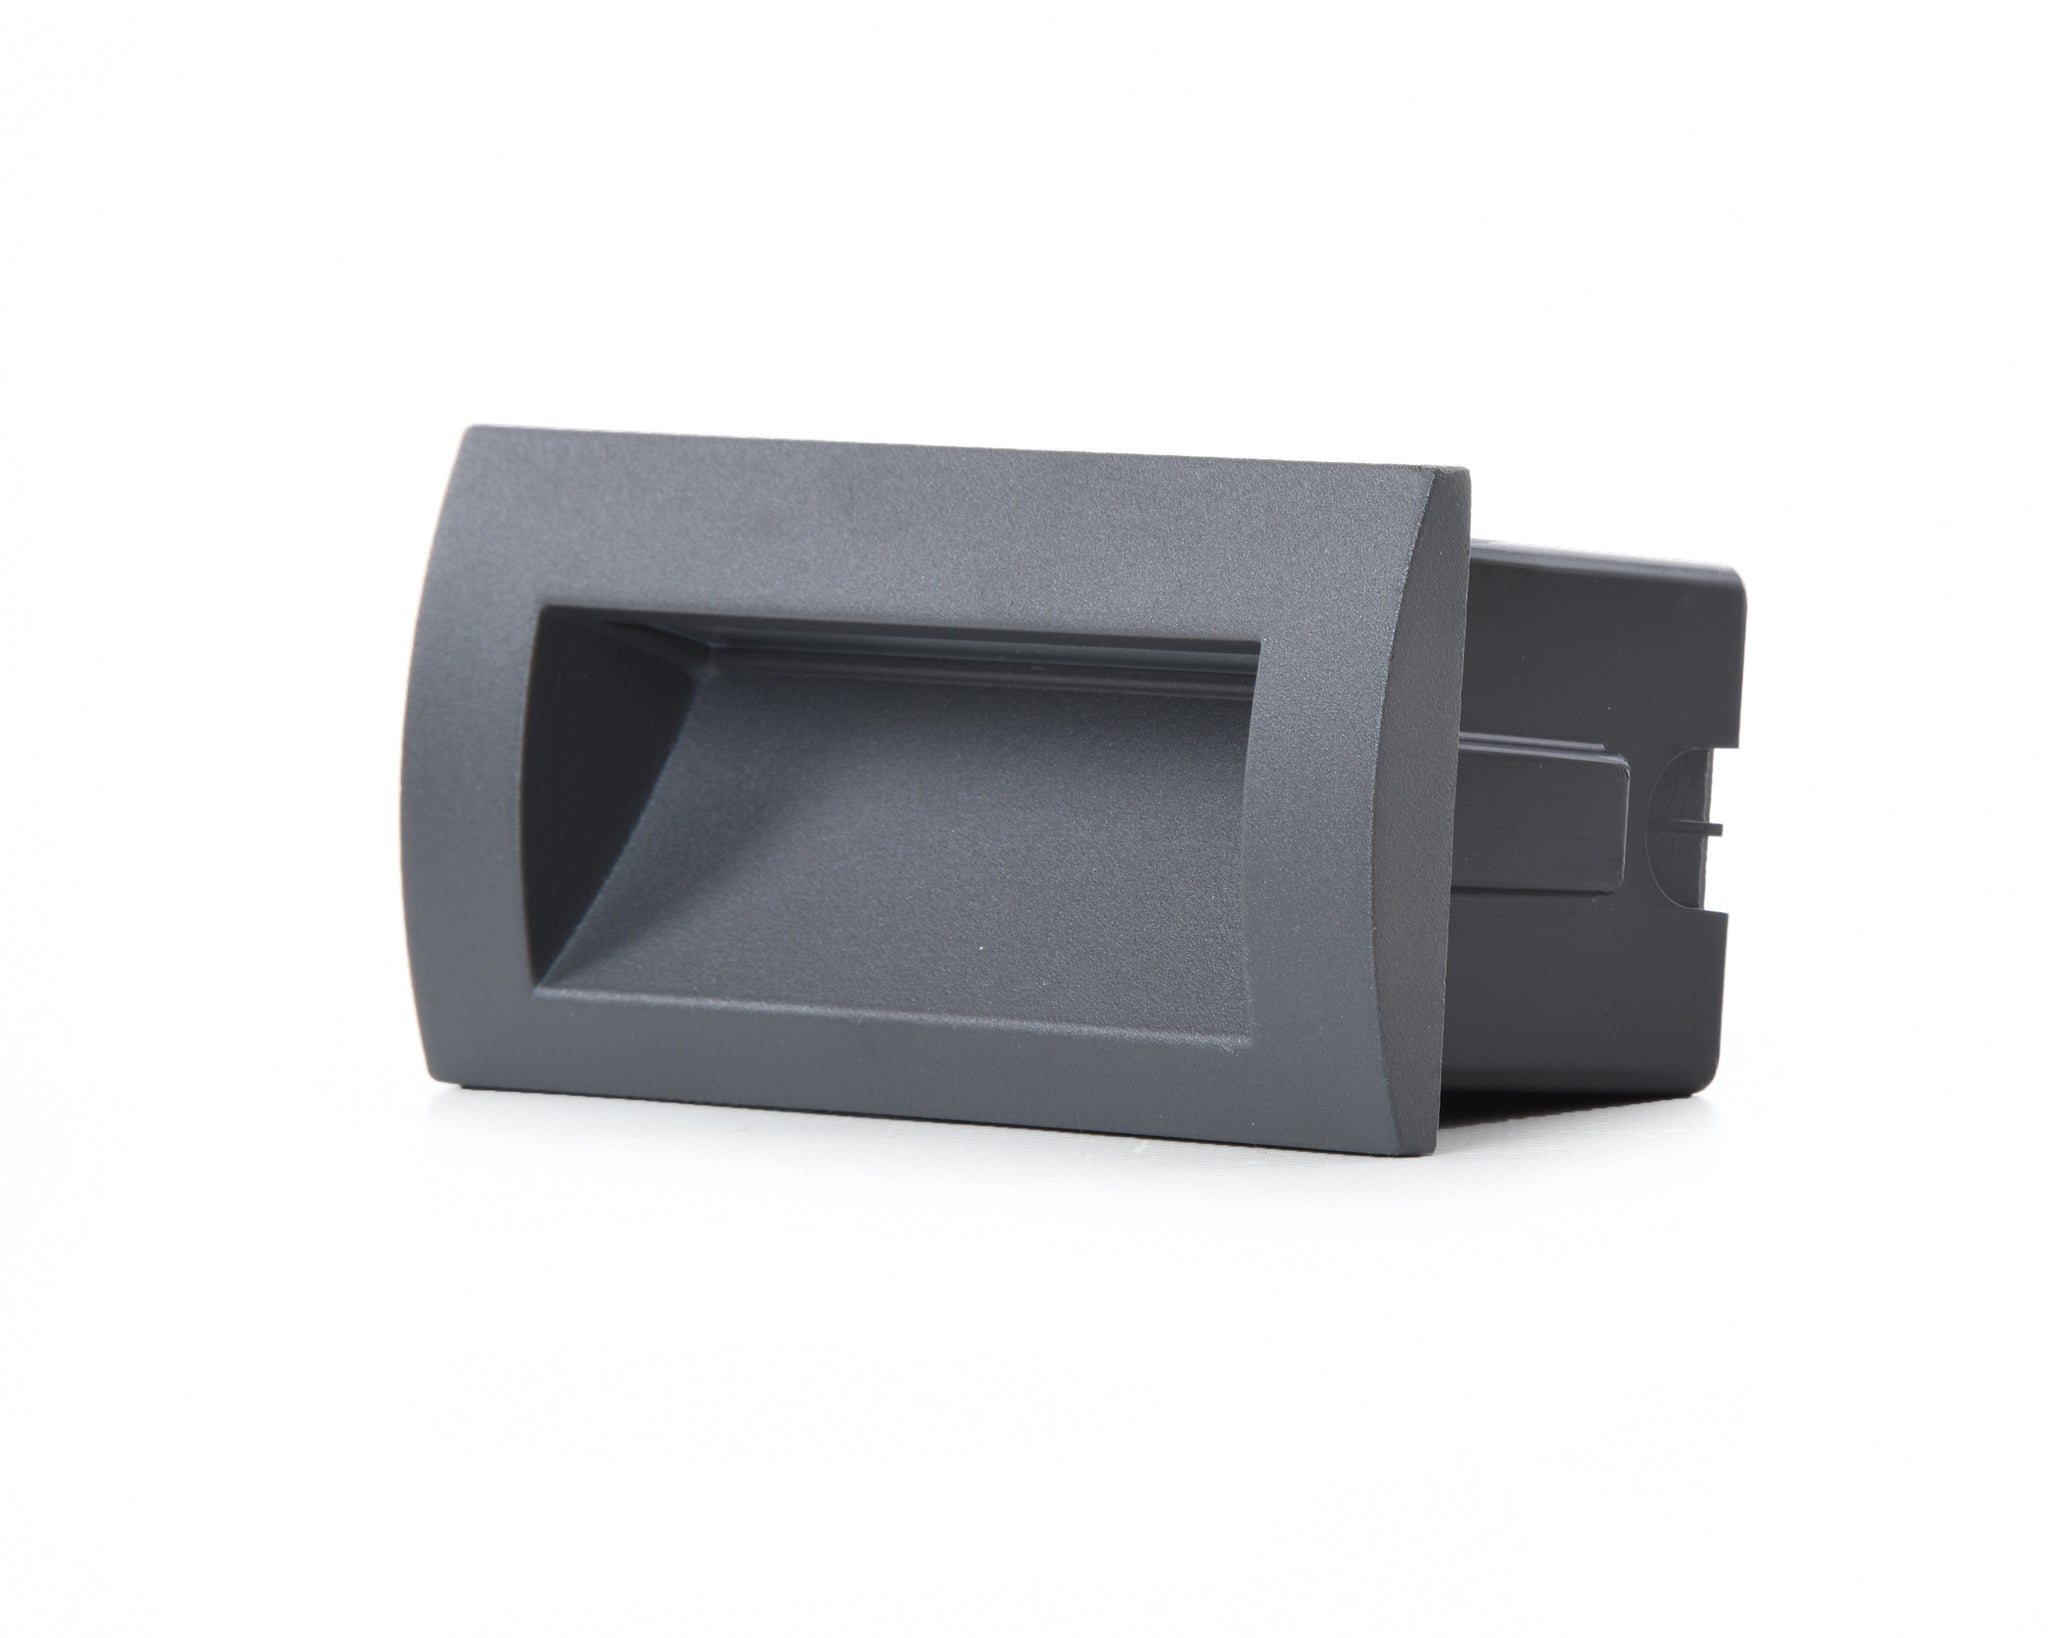 Low level LED path light - The Outside Lighting Specialists